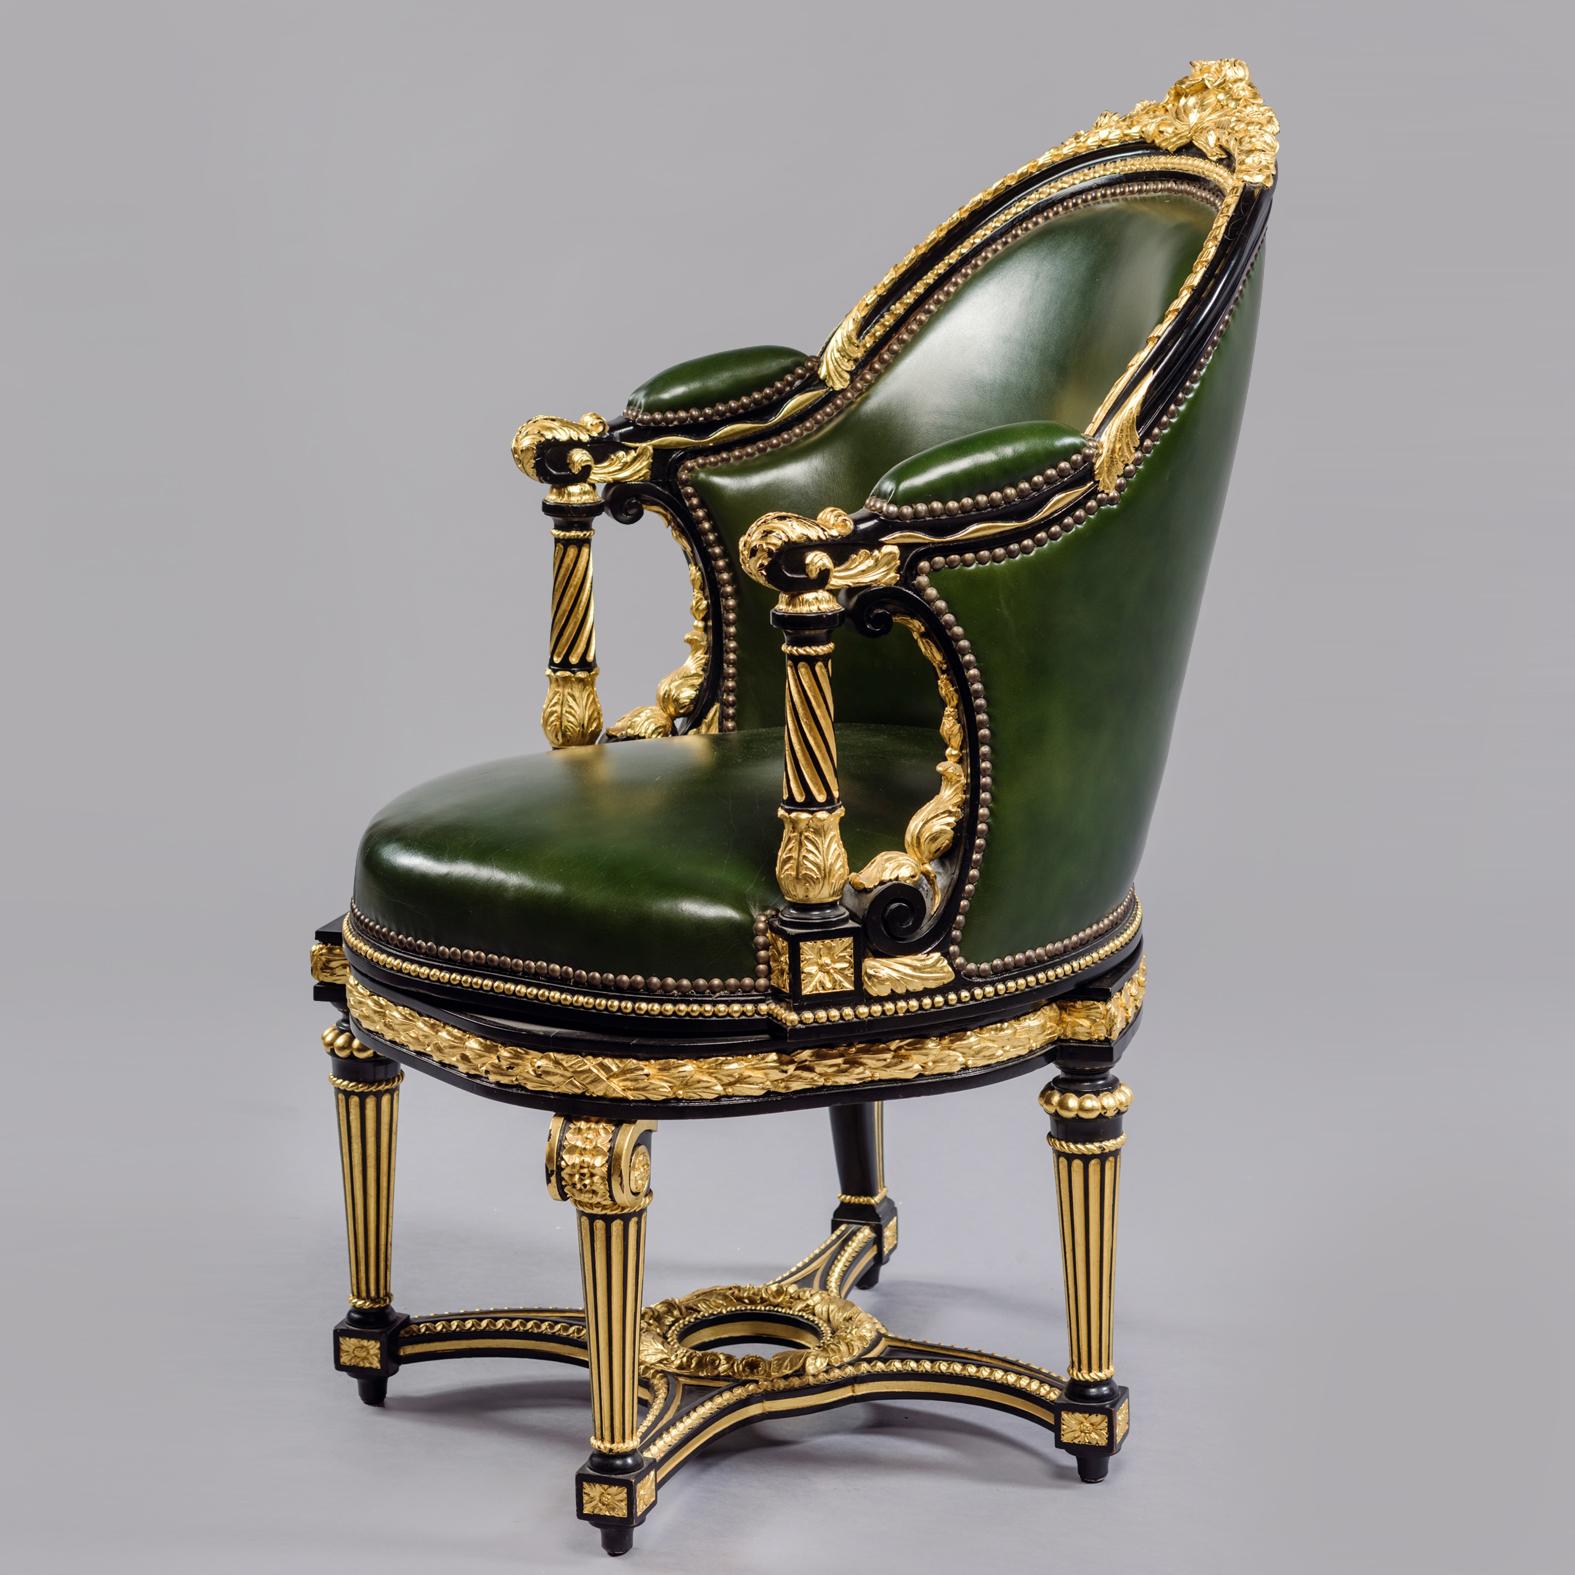 A Louis XVI Style Gilt and Ebonised Carved Rotating Desk Chair Upholstered in Green Leather.

Of tub form this comfortable rotating desk chair is finely carved with flowers and foliage and upholstered in green leather. It is raised on four tapered